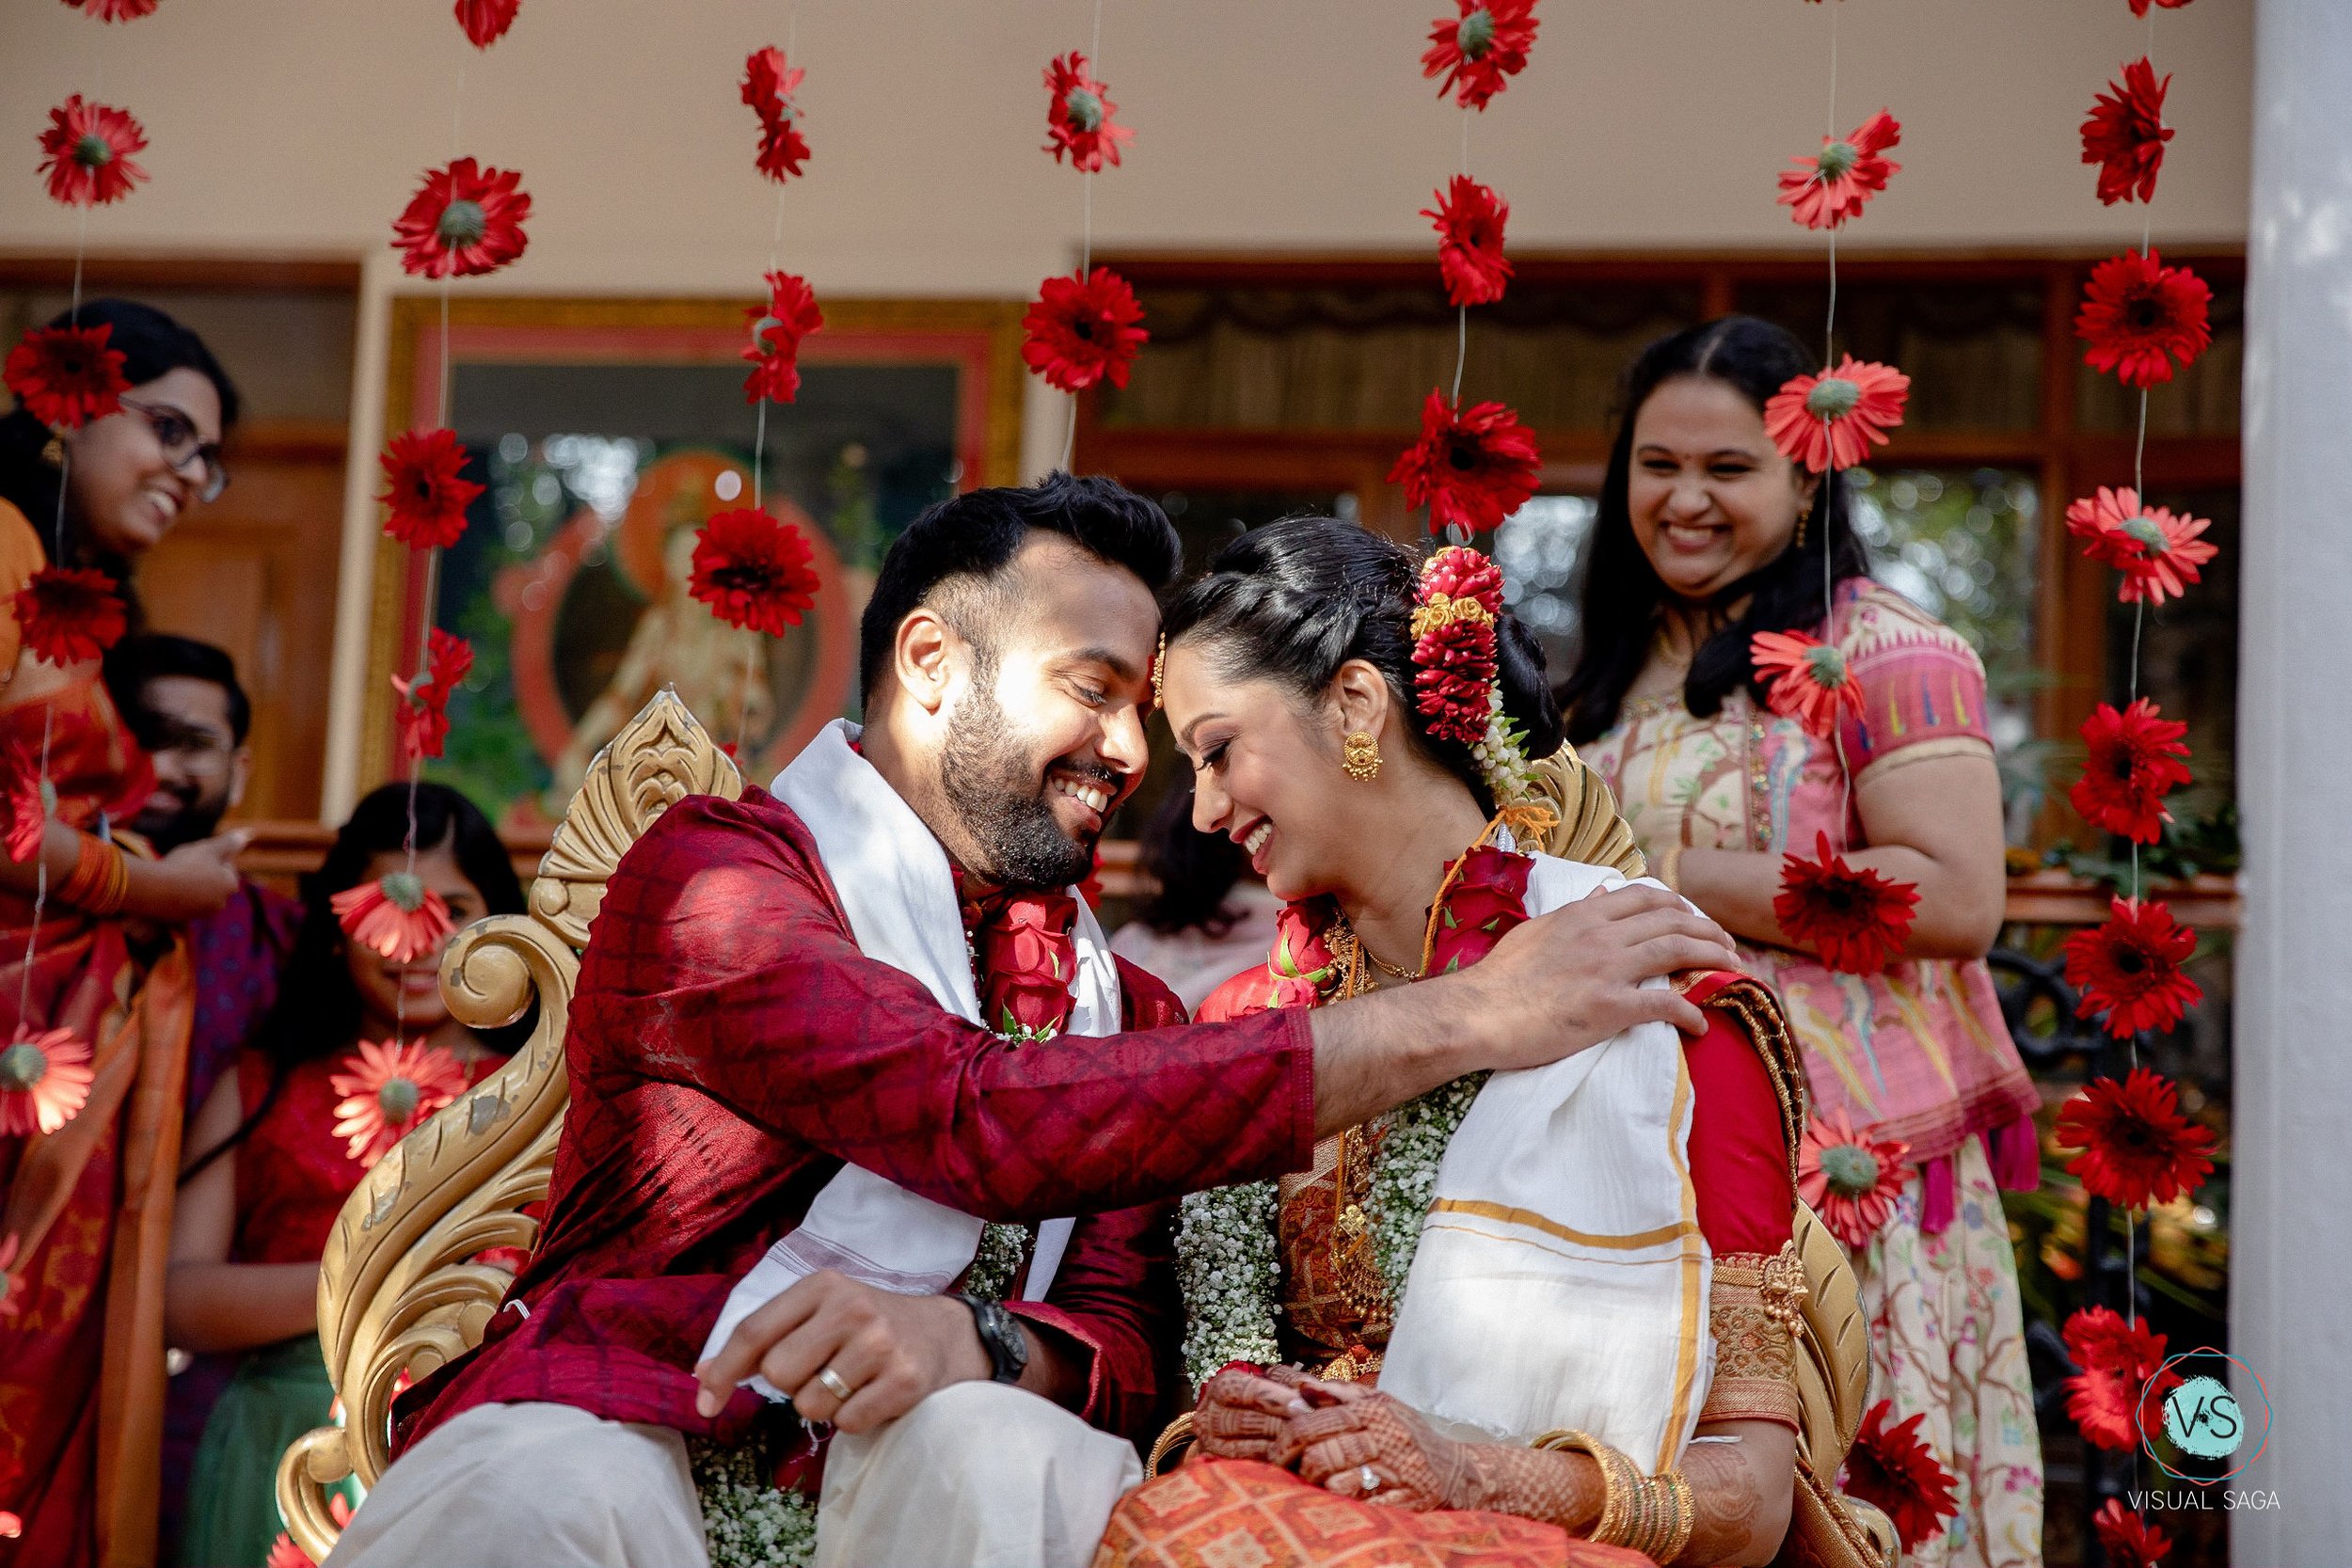 Visual Saga - best wedding photographers in bangalore and pune - happy moment between bride and groom on wedding day.jpg